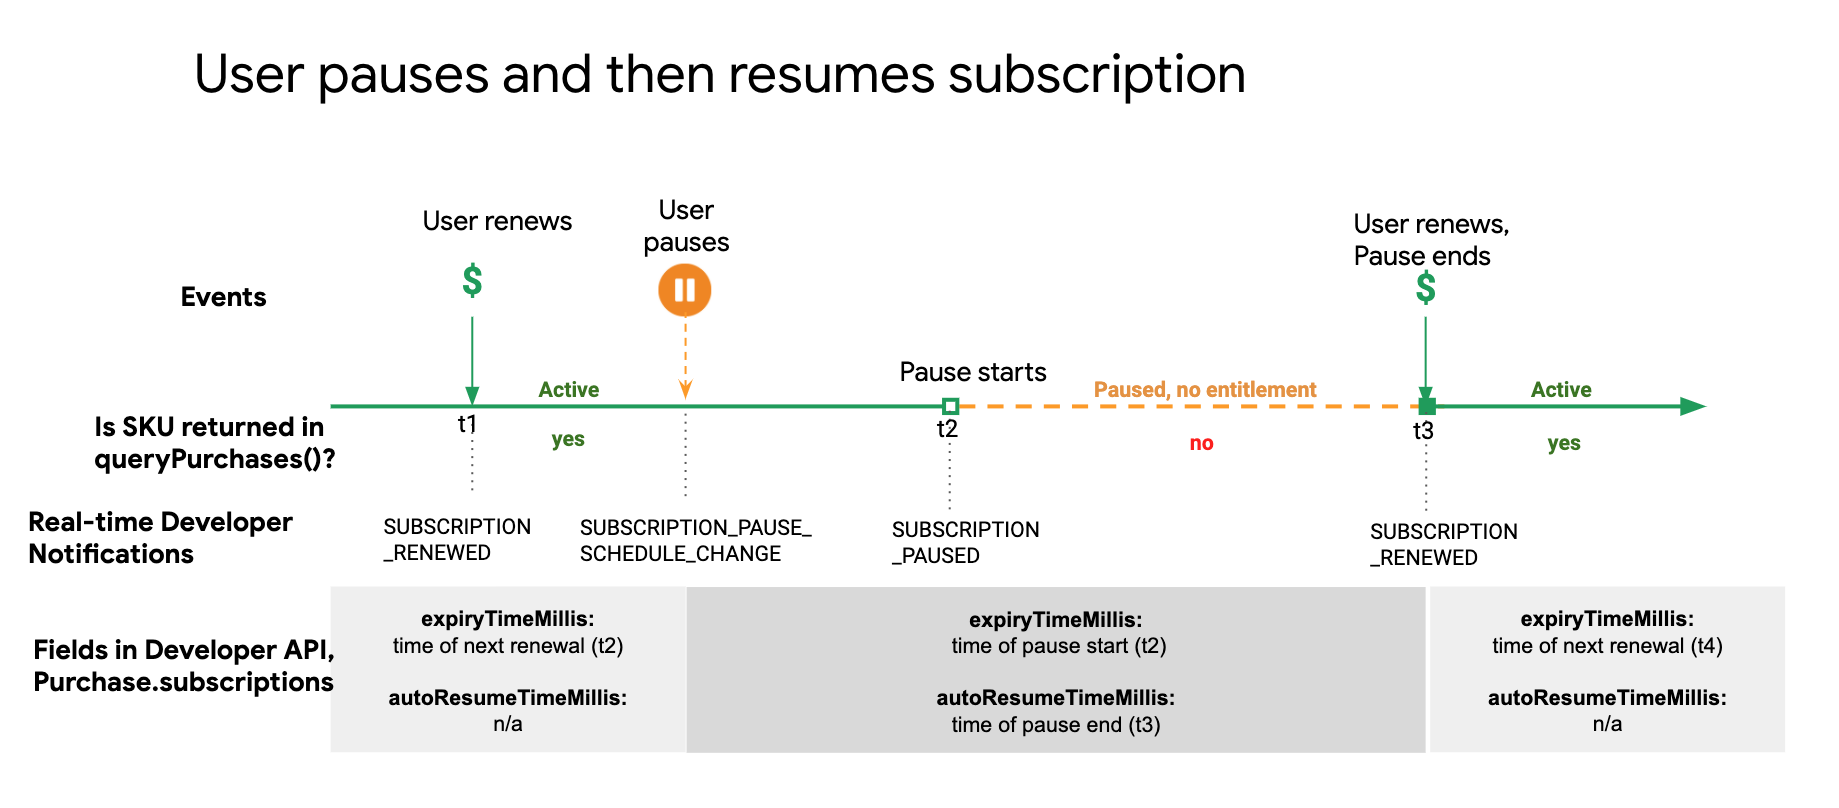 A user pauses and then resumes their subscription